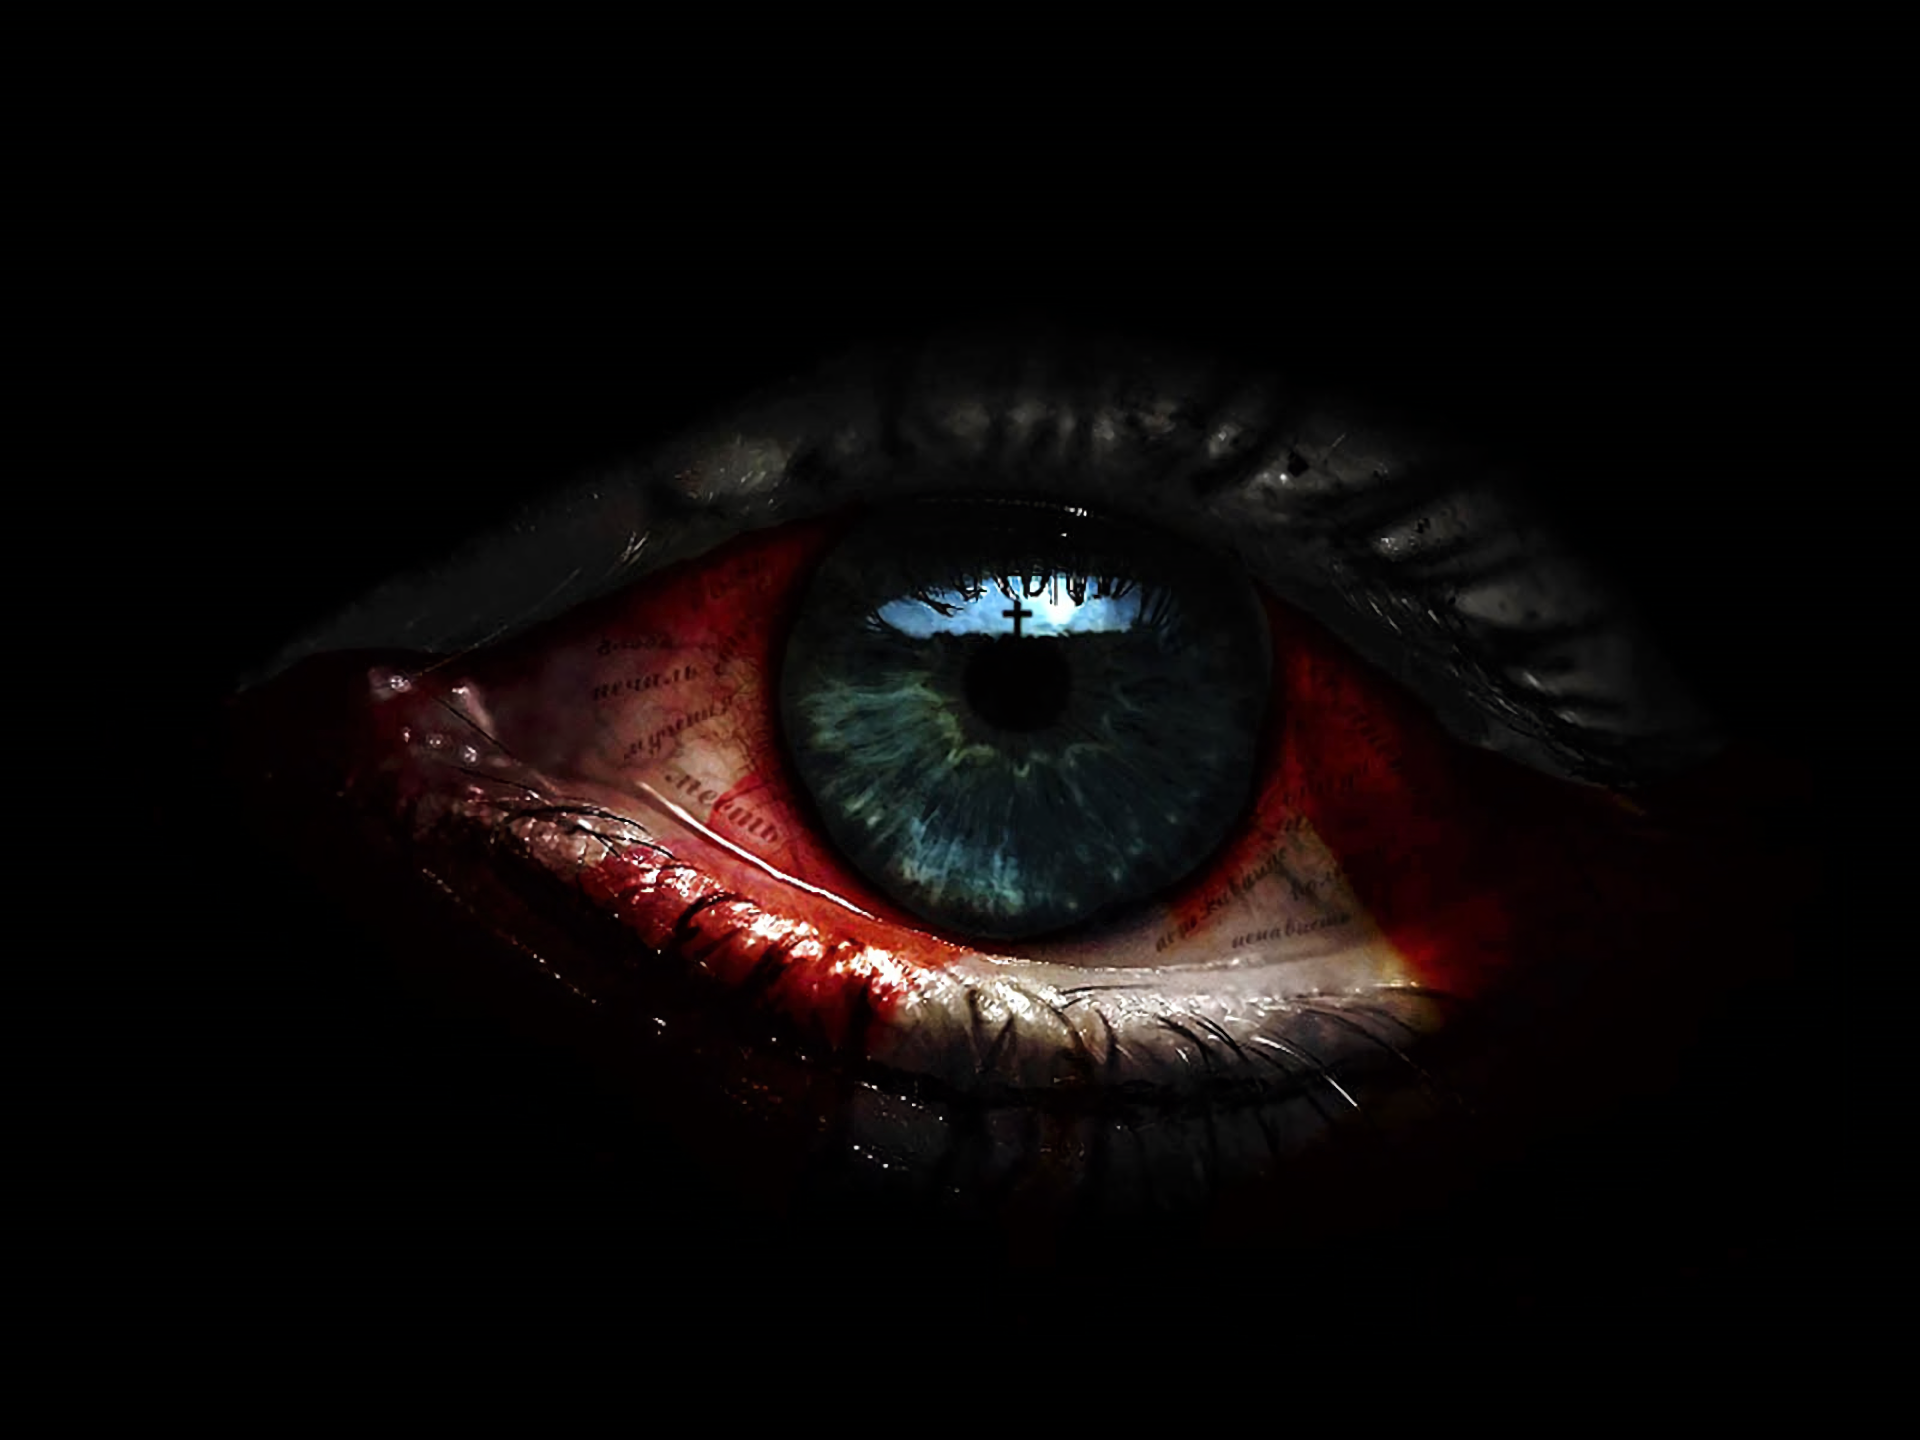 1920x1440 Scary Eye Wallpaper Background Image. 